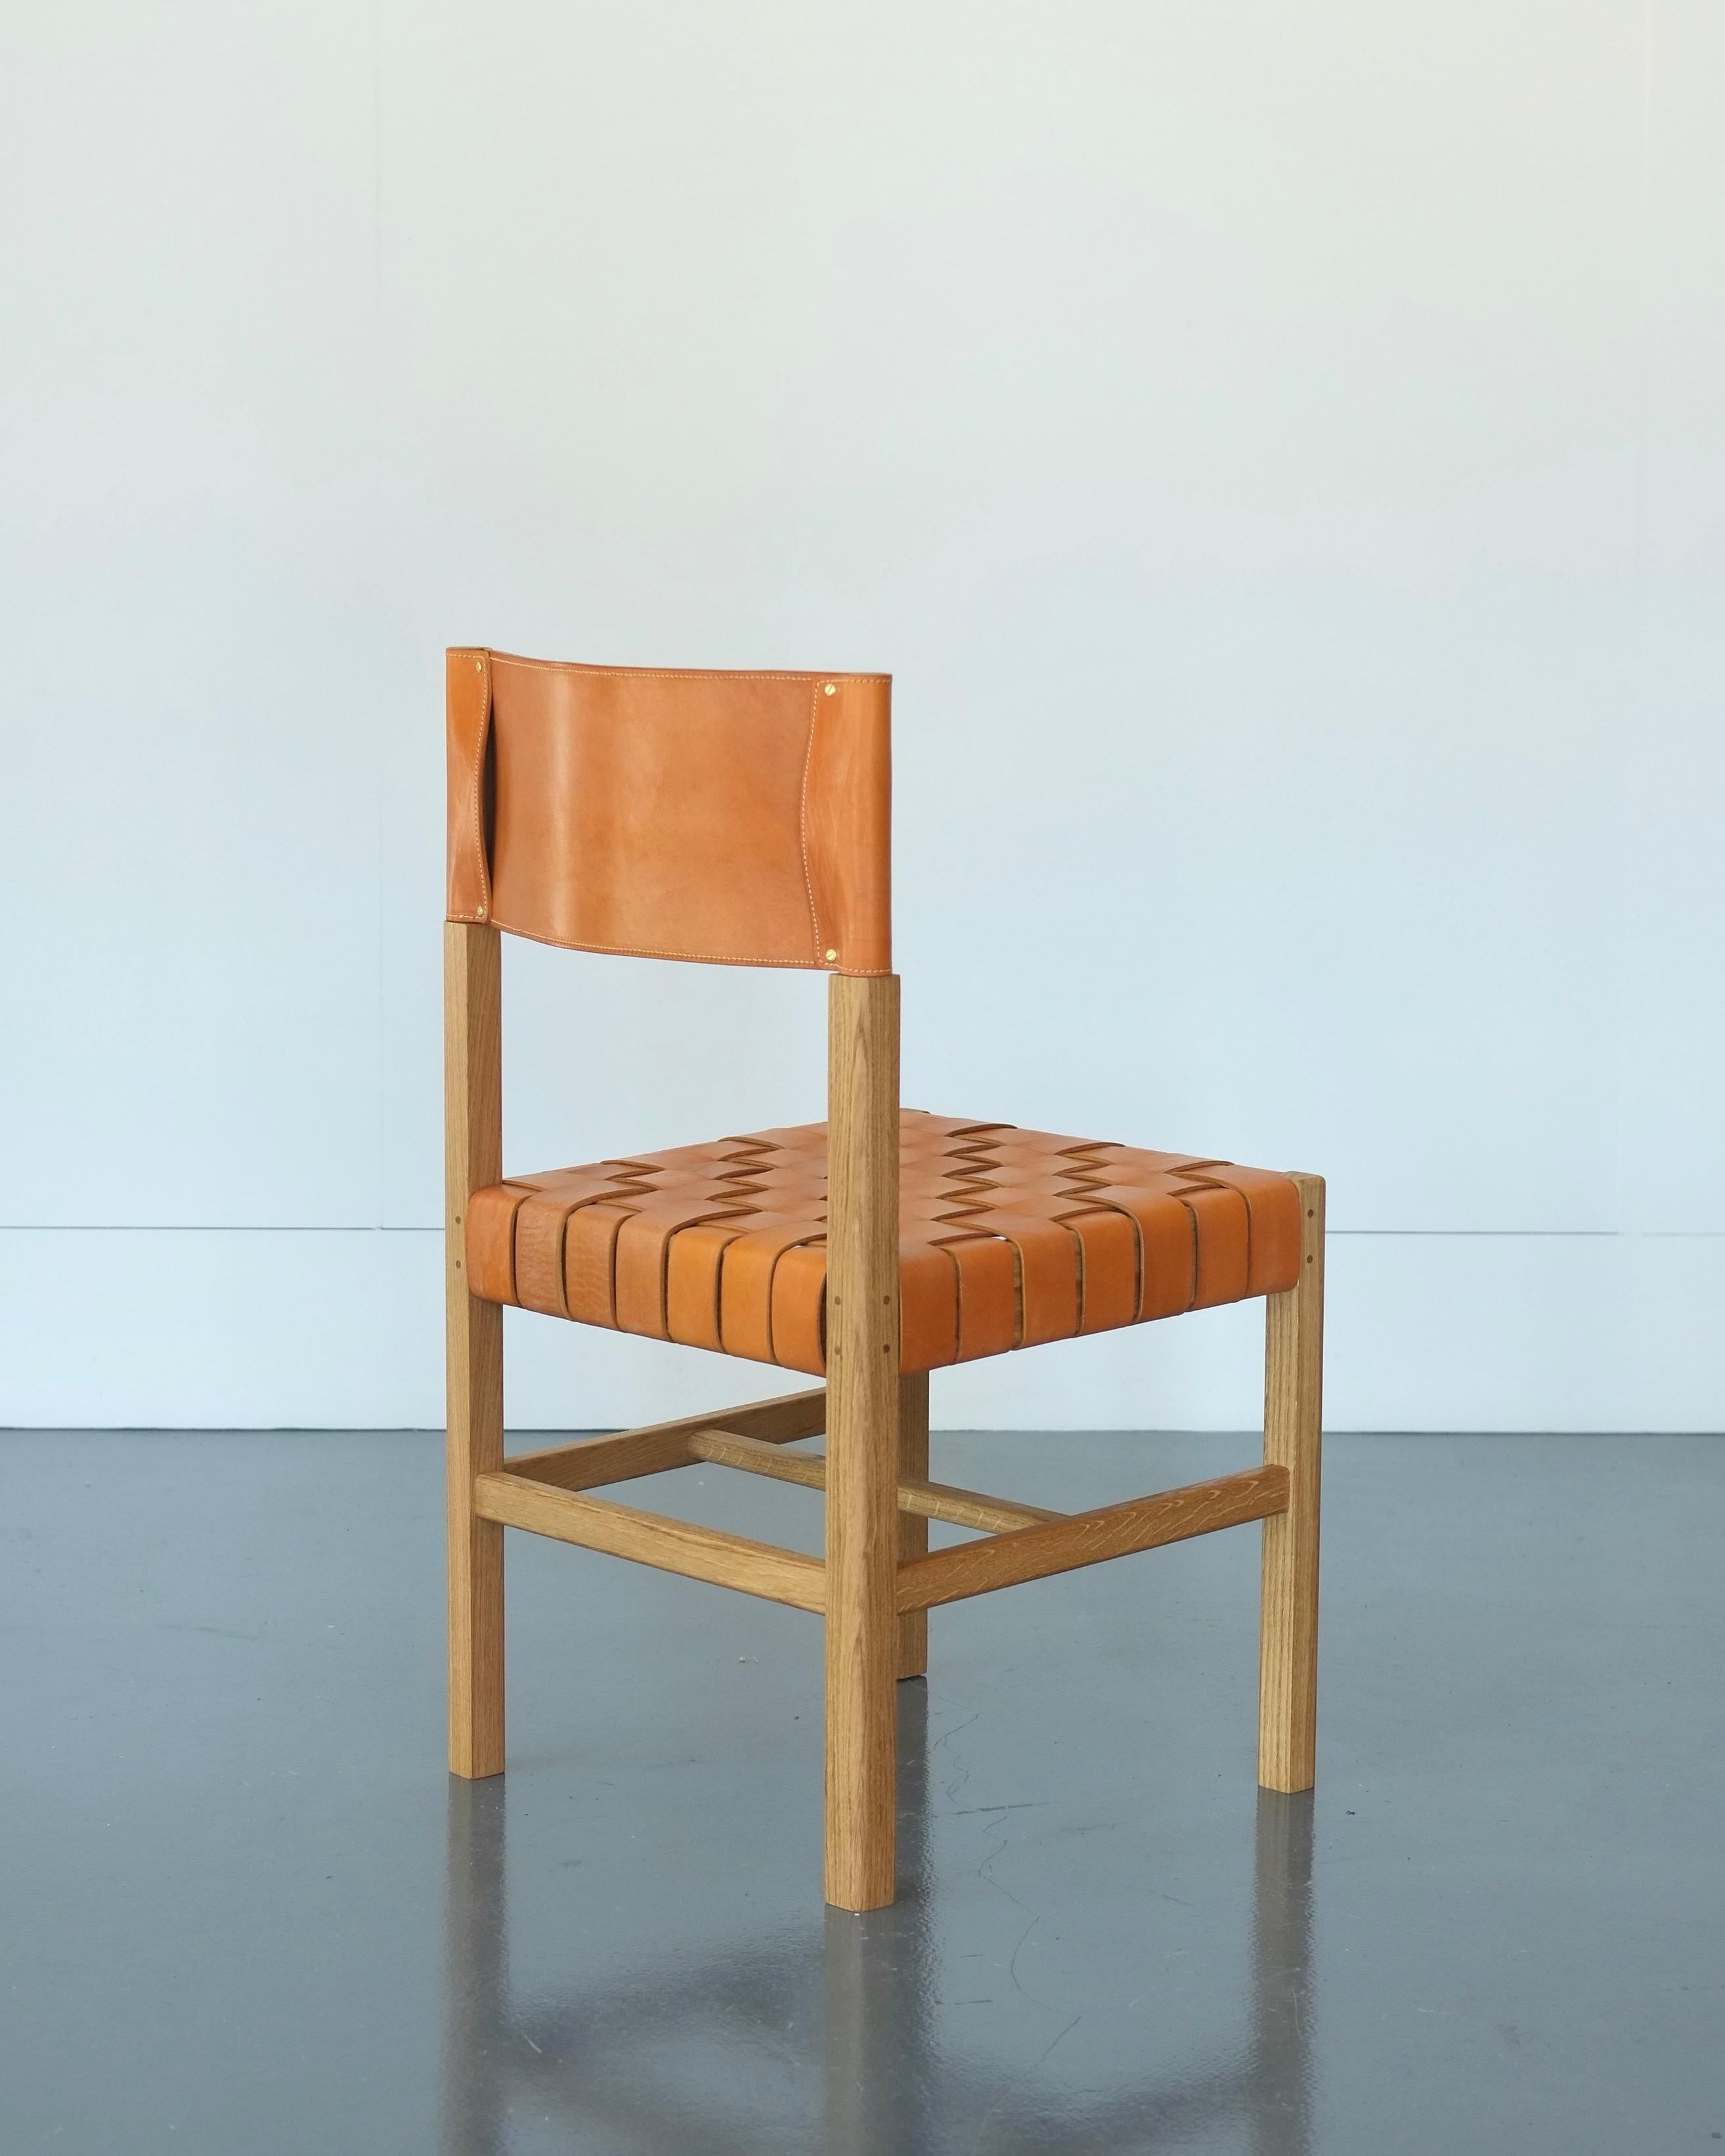 Inspired by the utilitarian and timeless minimalism of the Shaker tradition, the Cinch dining or occasional chair fuses traditional timber frame joinery and classic leather working techniques. Hand turned back legs and pinned tenon joints are paired